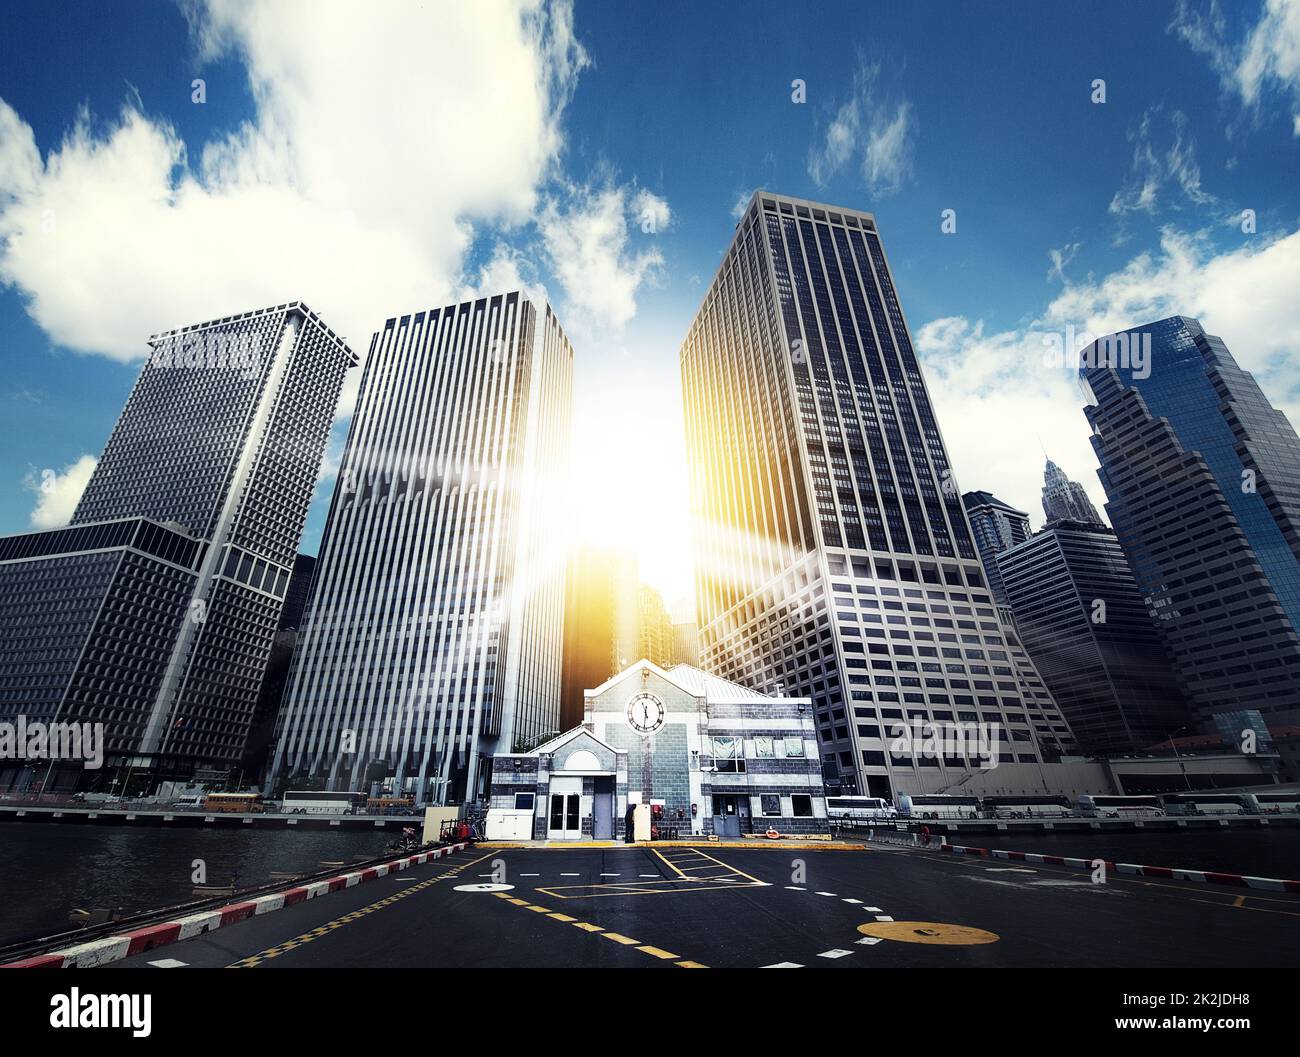 At the heart of the business world. Shot of tall buildings in an urban business district. Stock Photo